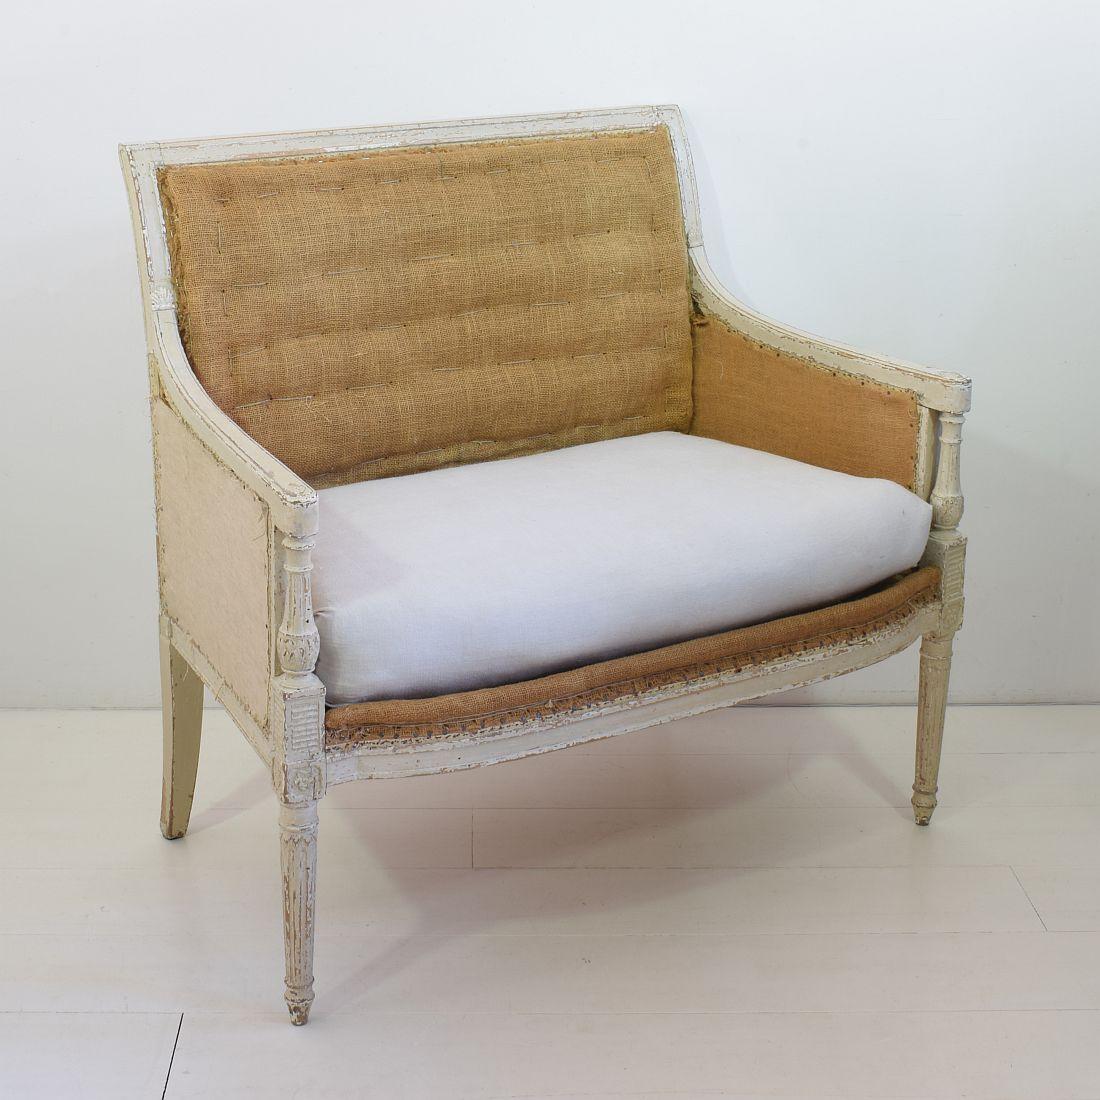 Hand-Crafted Late 18th Century French Directoire Canape Settee Marquis